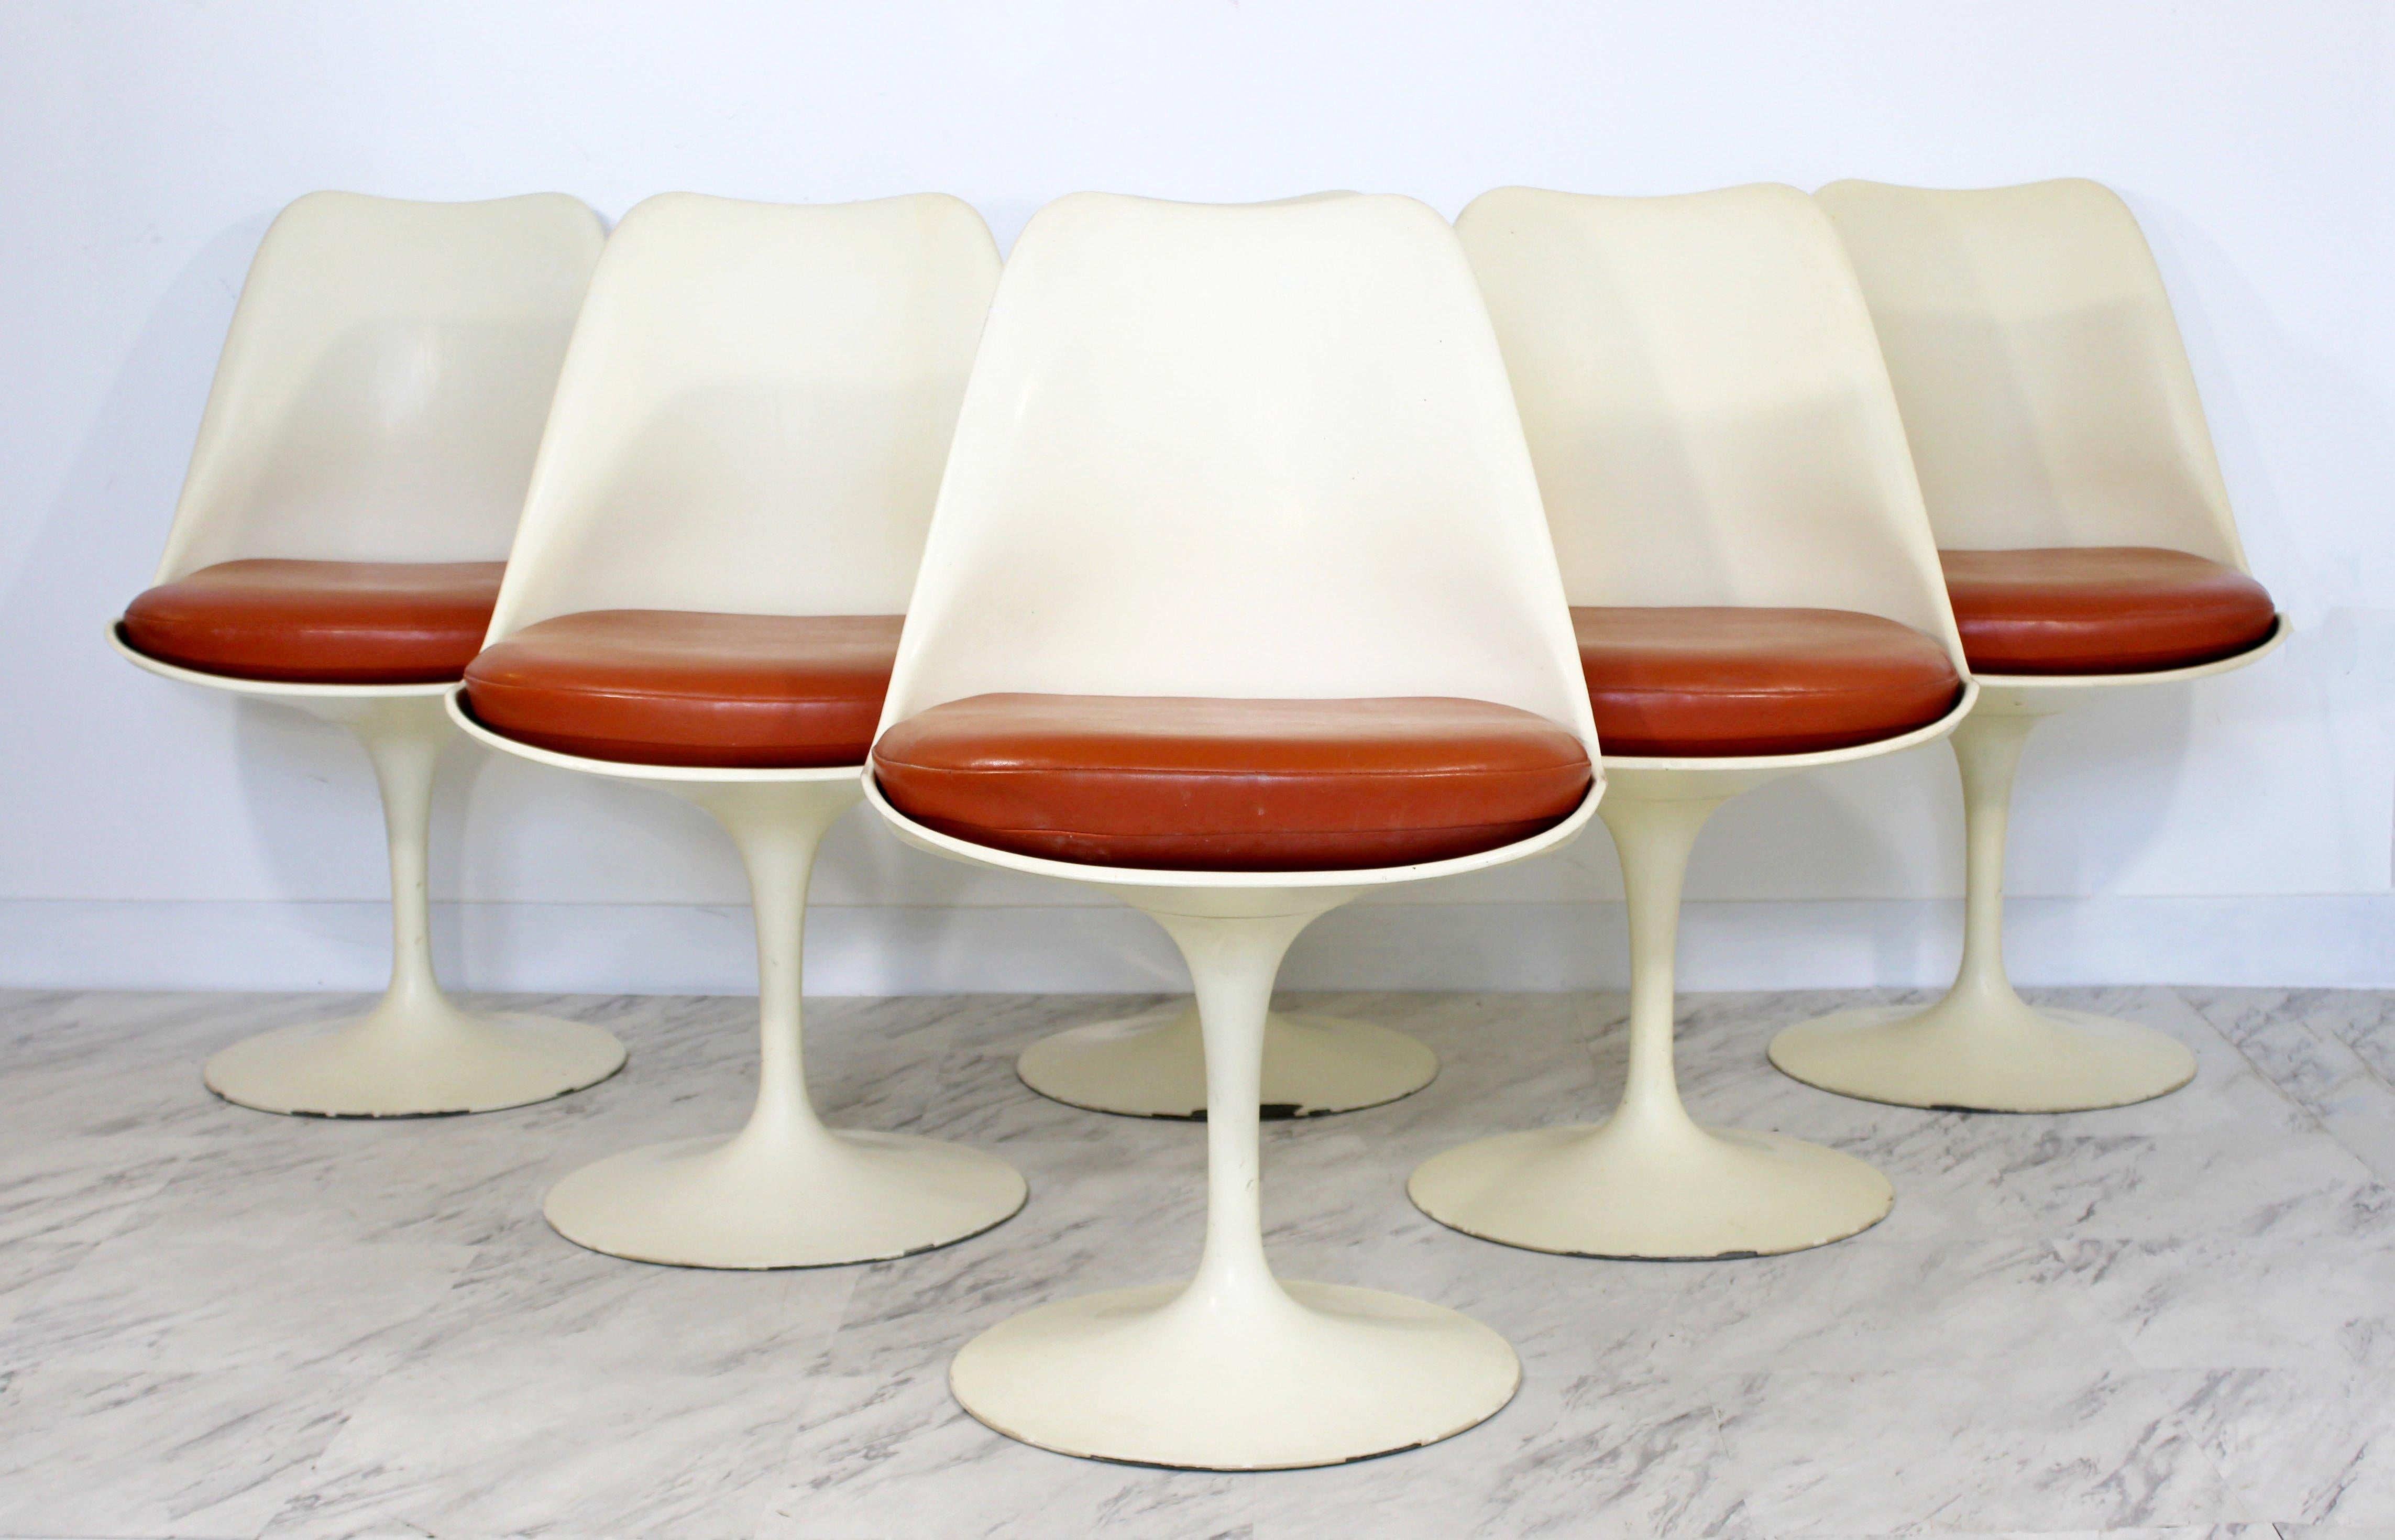 For your consideration is a fantastic set of six side dining chairs, by Eero Saarinen for Knoll, in his classic tulip style, circa the early 1960s. In good vintage condition. The dimensions are 19